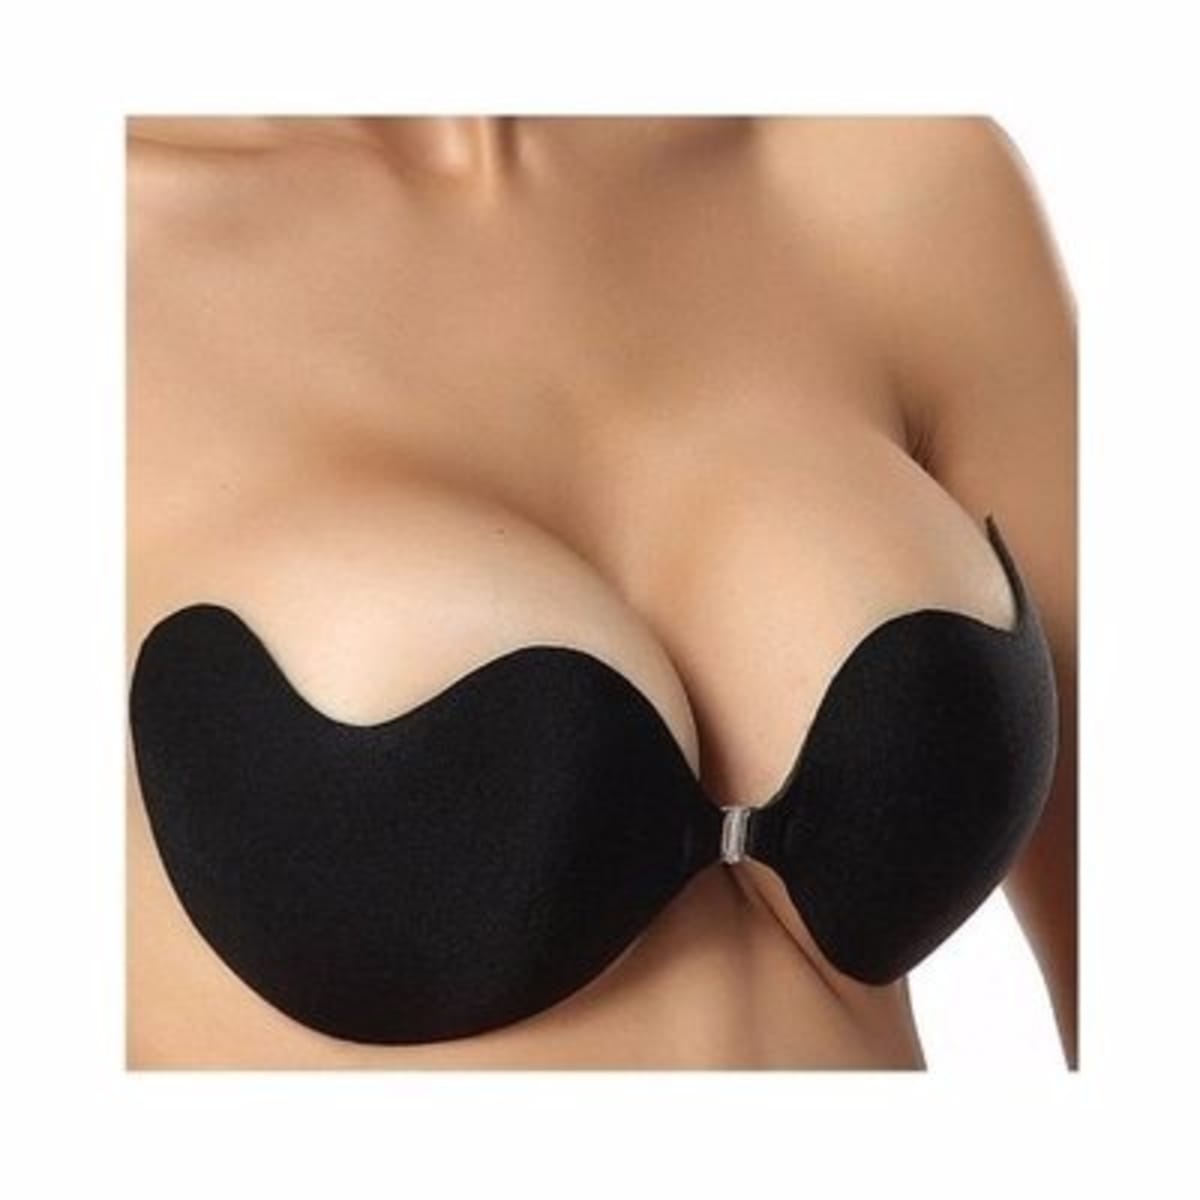 Frontless Backless And Strapless Push Up Bra Kit